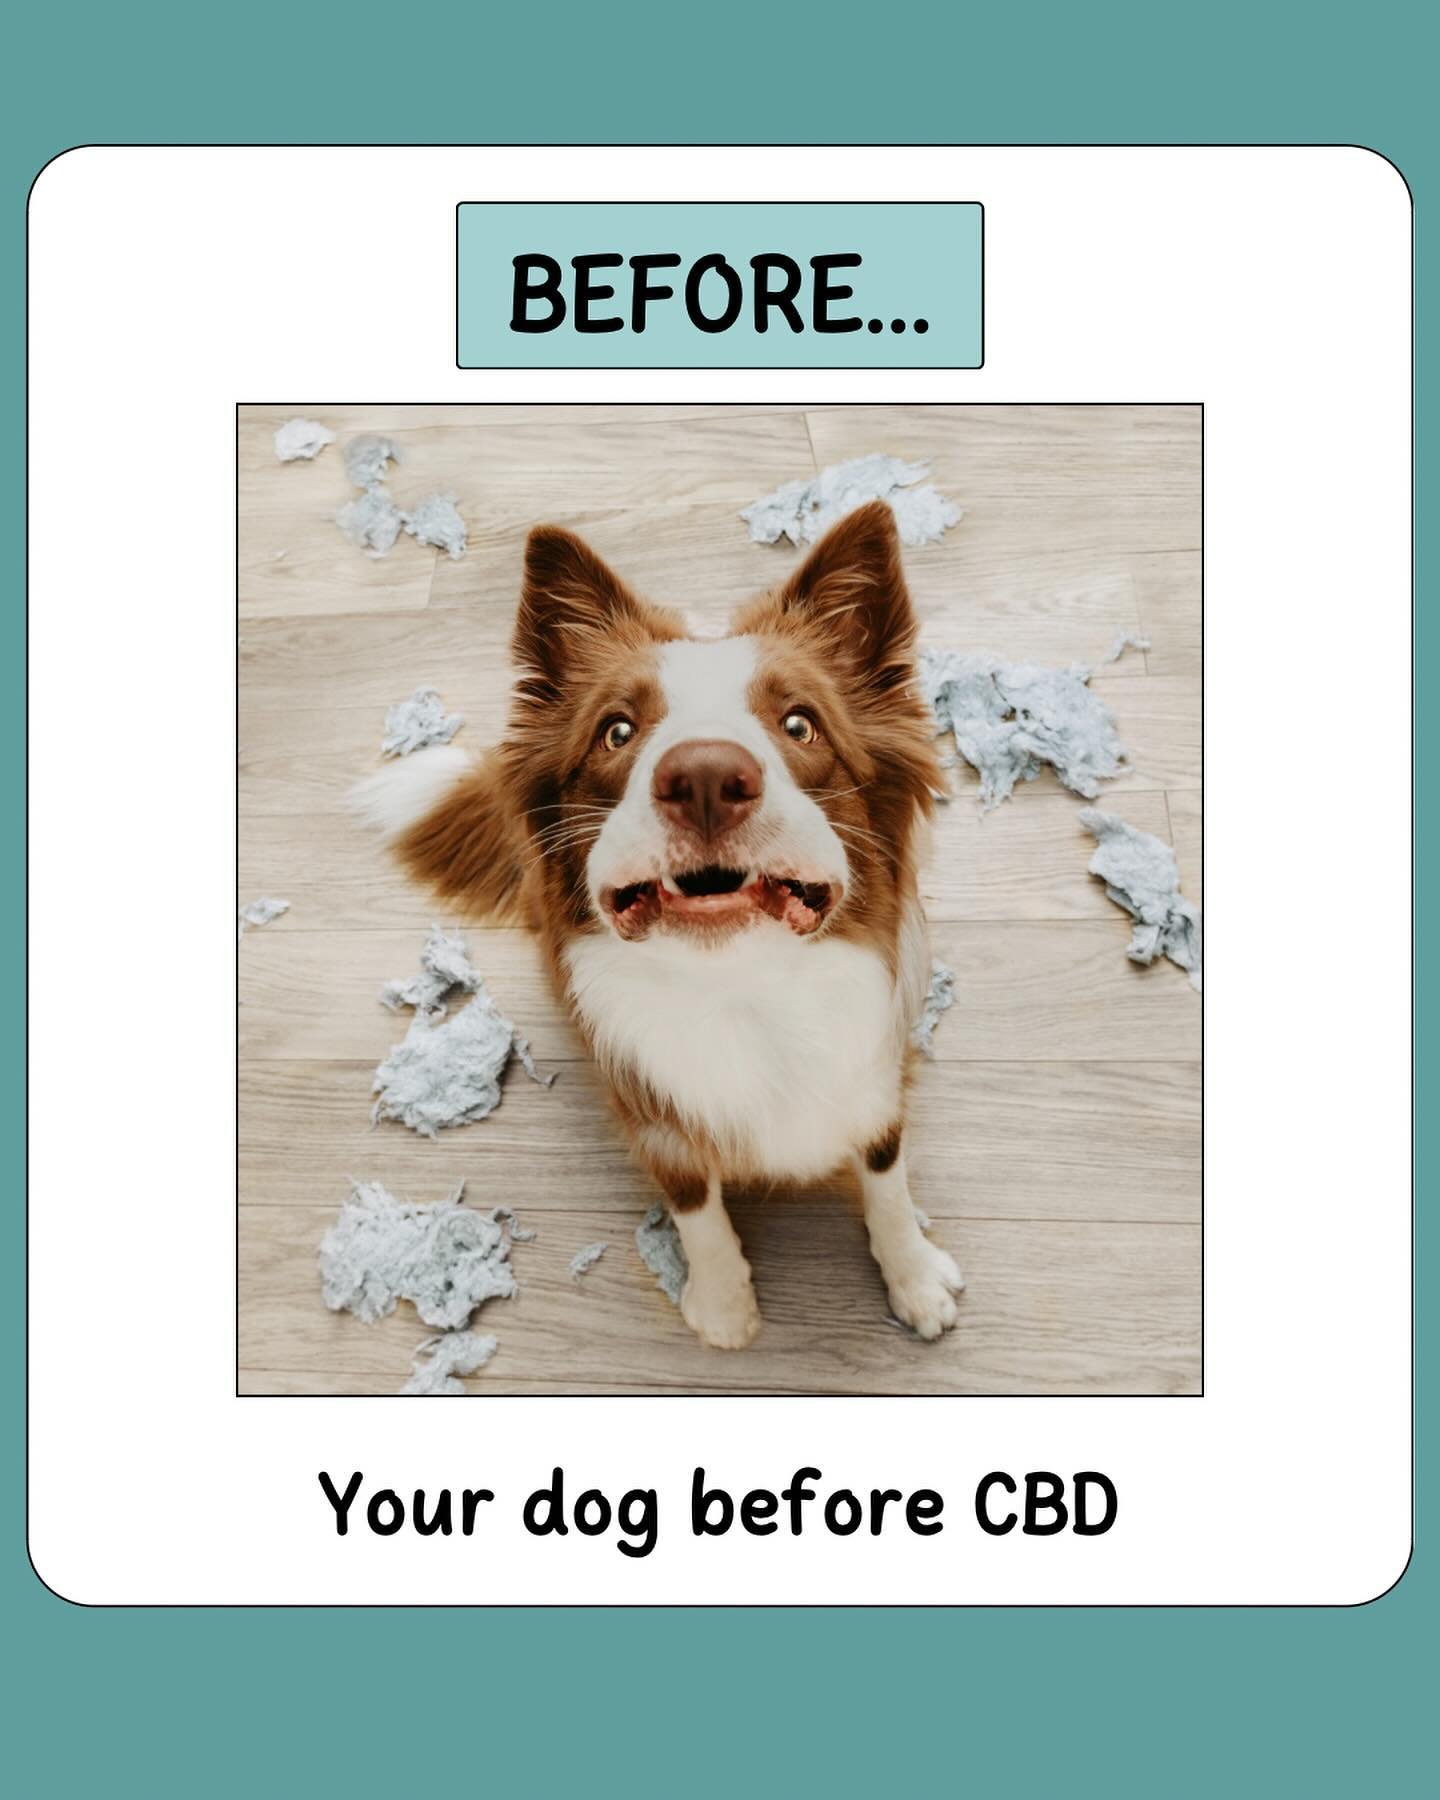 Is your dog a nervous wreck? Are your dog&rsquo;s antics turning YOU into a nervous wreck? Good news&hellip; CBD could help your pooch relax and chill! 

That&rsquo;s right, CBD isn&rsquo;t just for humans. It can keep your dog healthy and happy, too